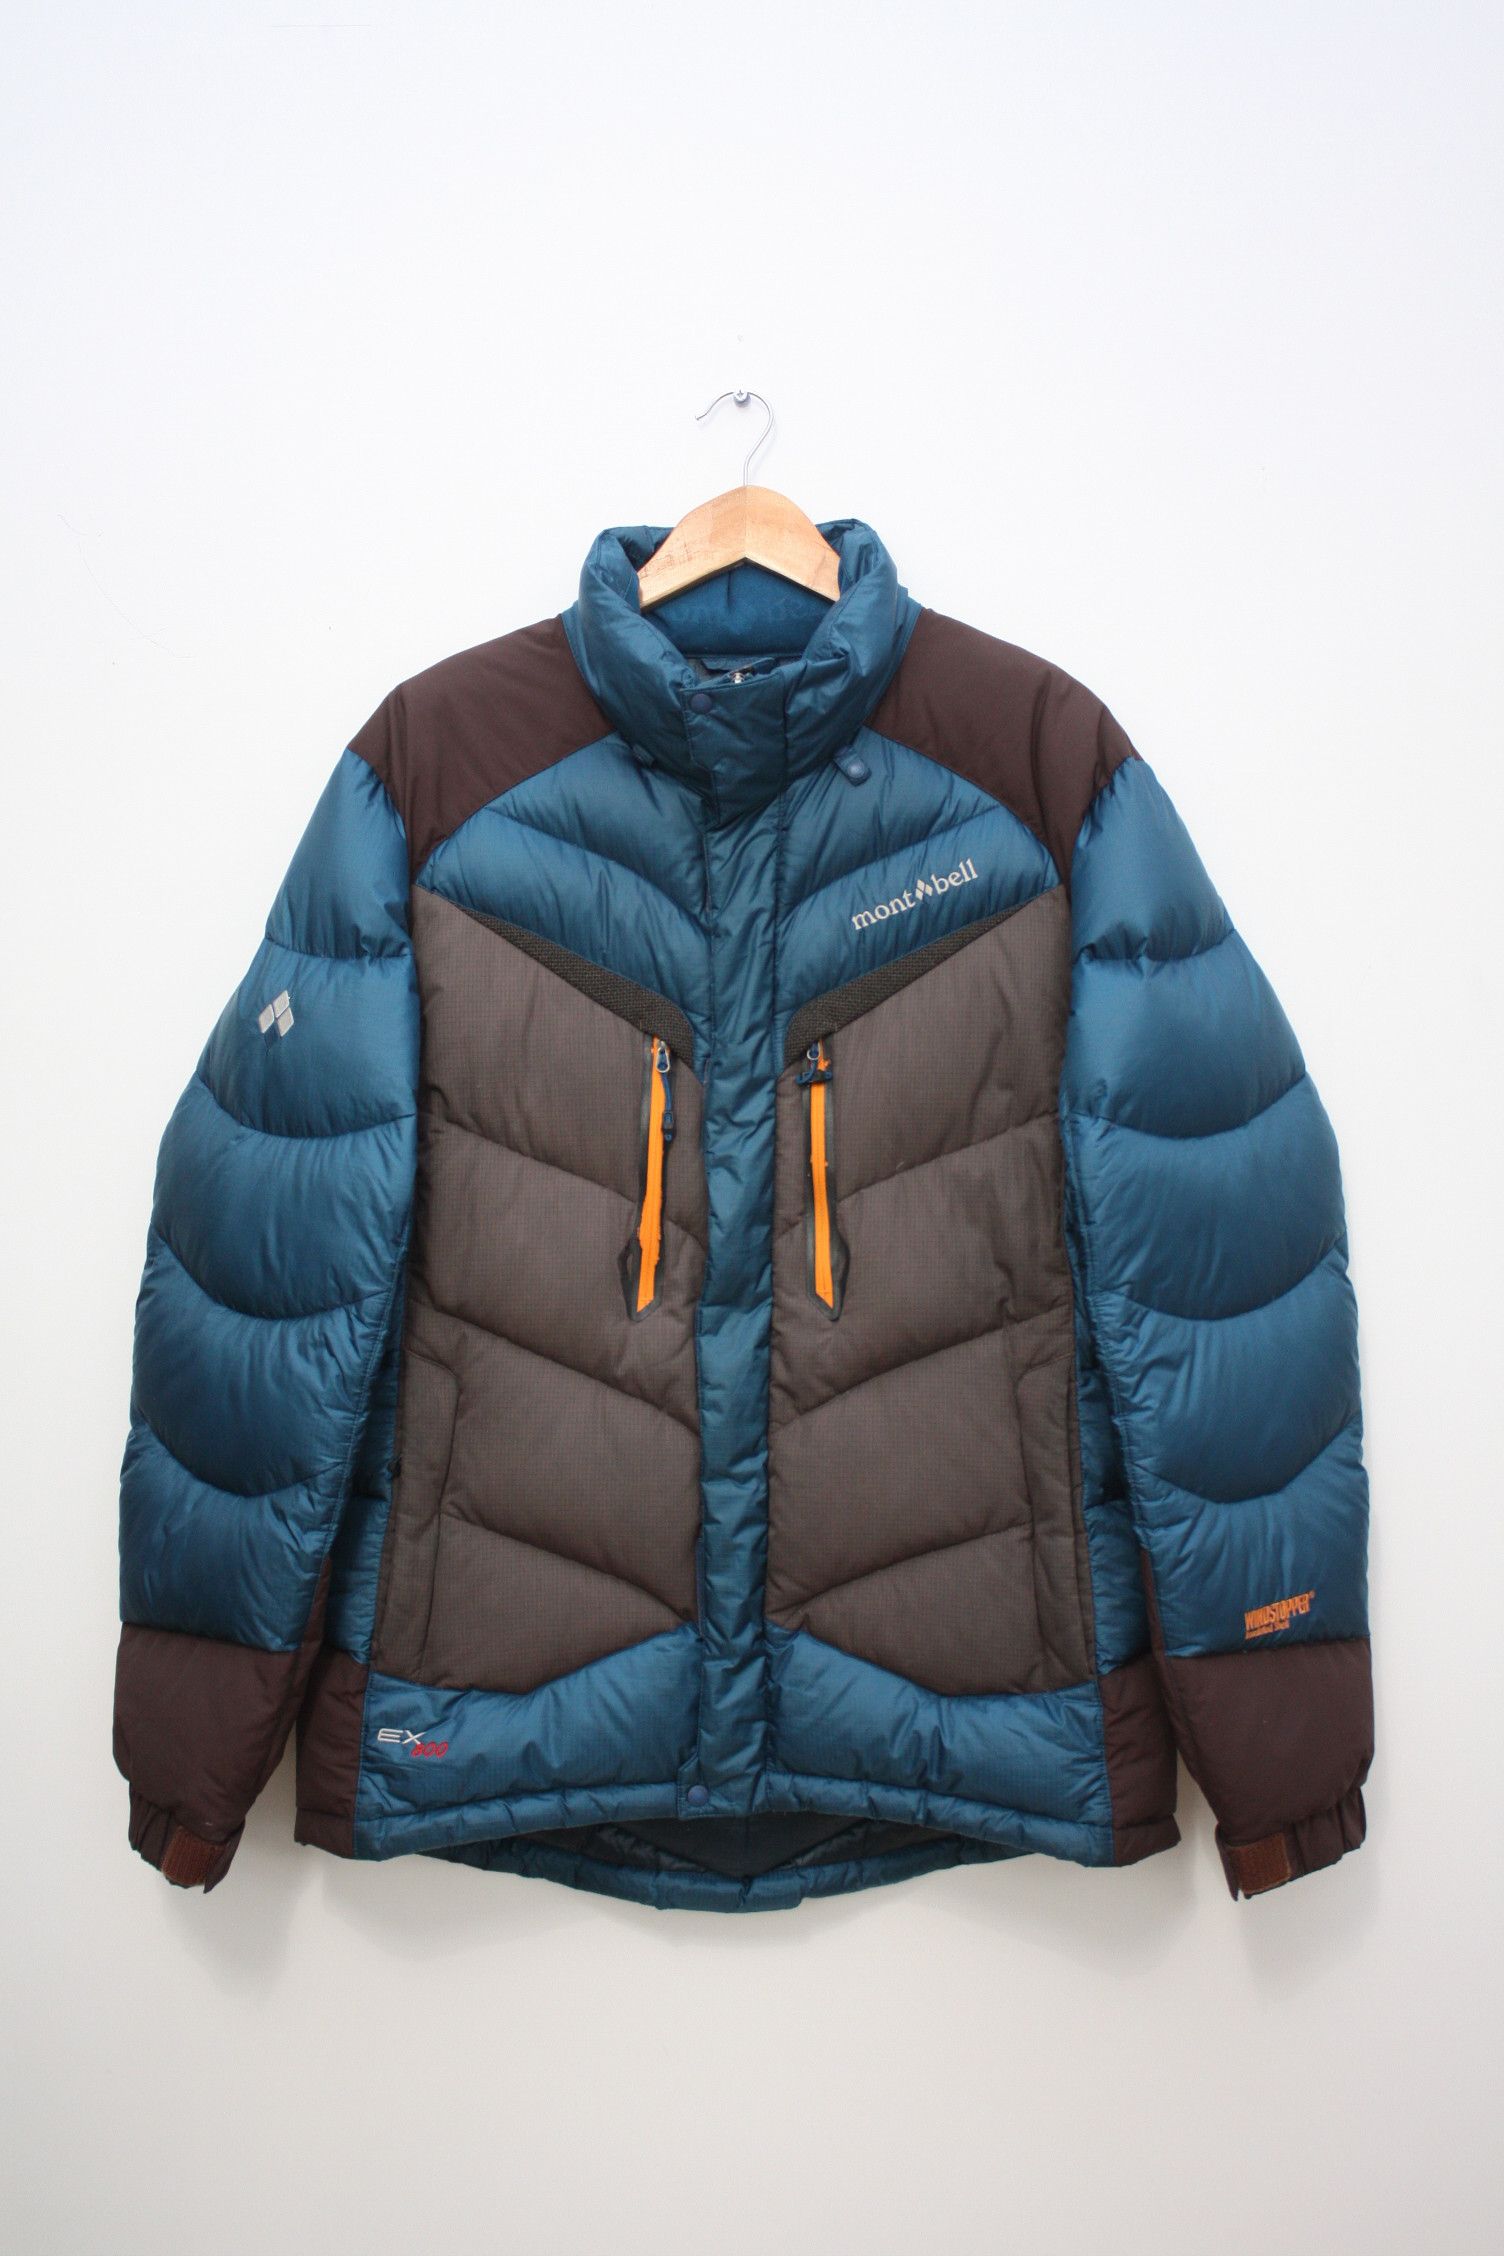 montbell reversible puffer jacket Y2K - fawema.org